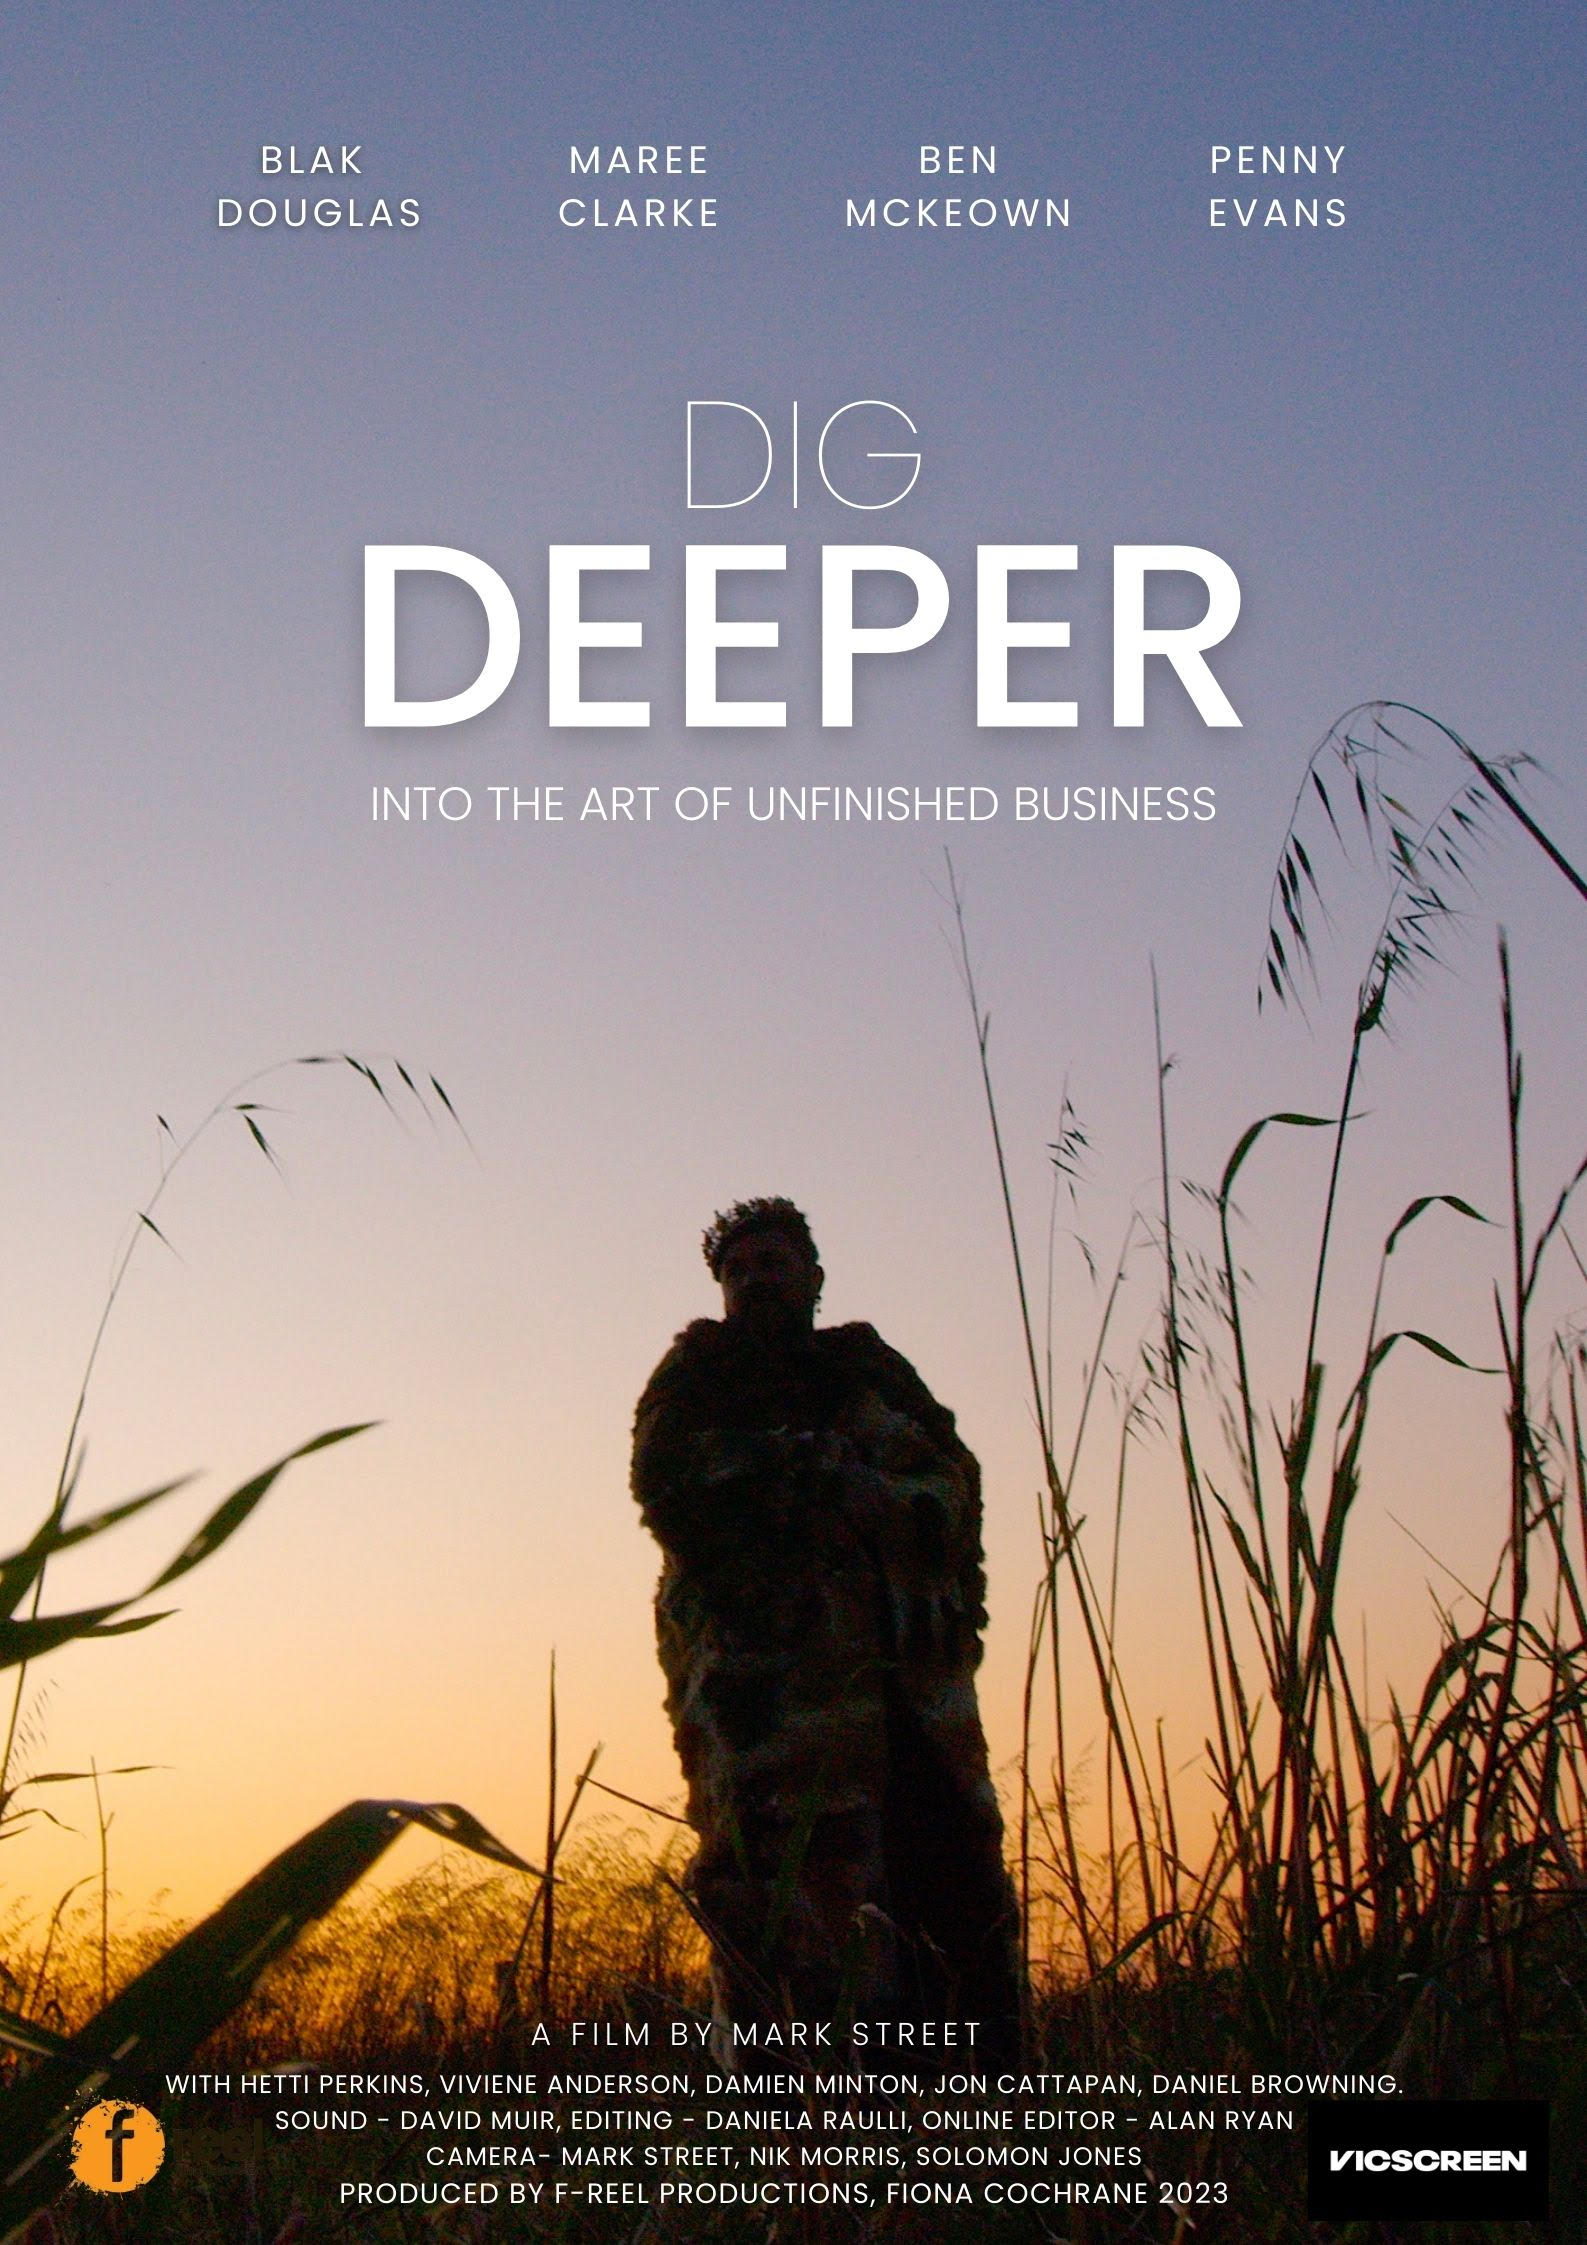 Film cover for Dig Deeper. Person with possum skin cloak silhouetted against a sunset sky